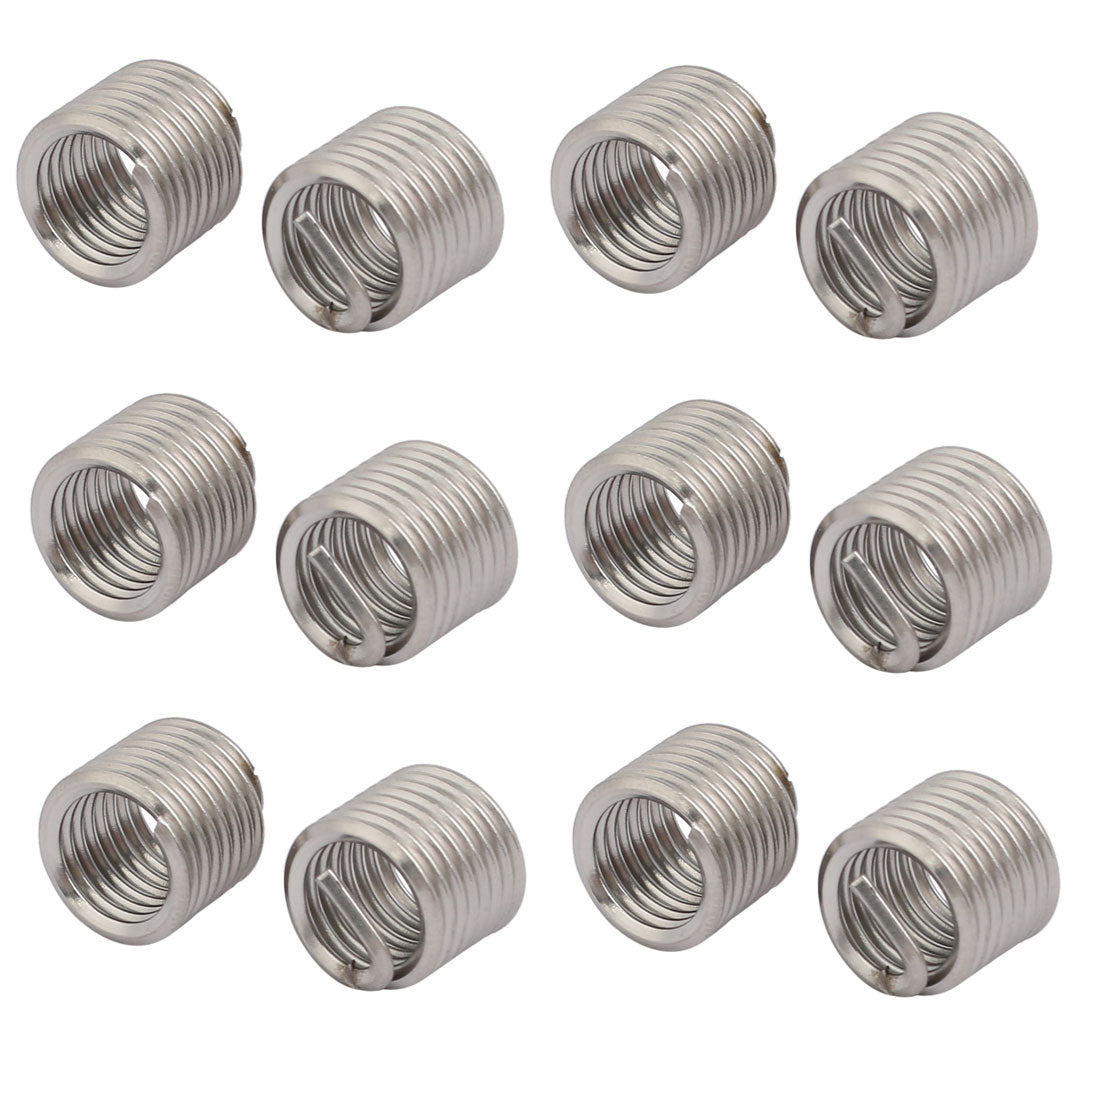 uxcell Uxcell M10x1.5mmx15mm 304 Stainless Steel Helical Coil Wire Thread Insert 12pcs